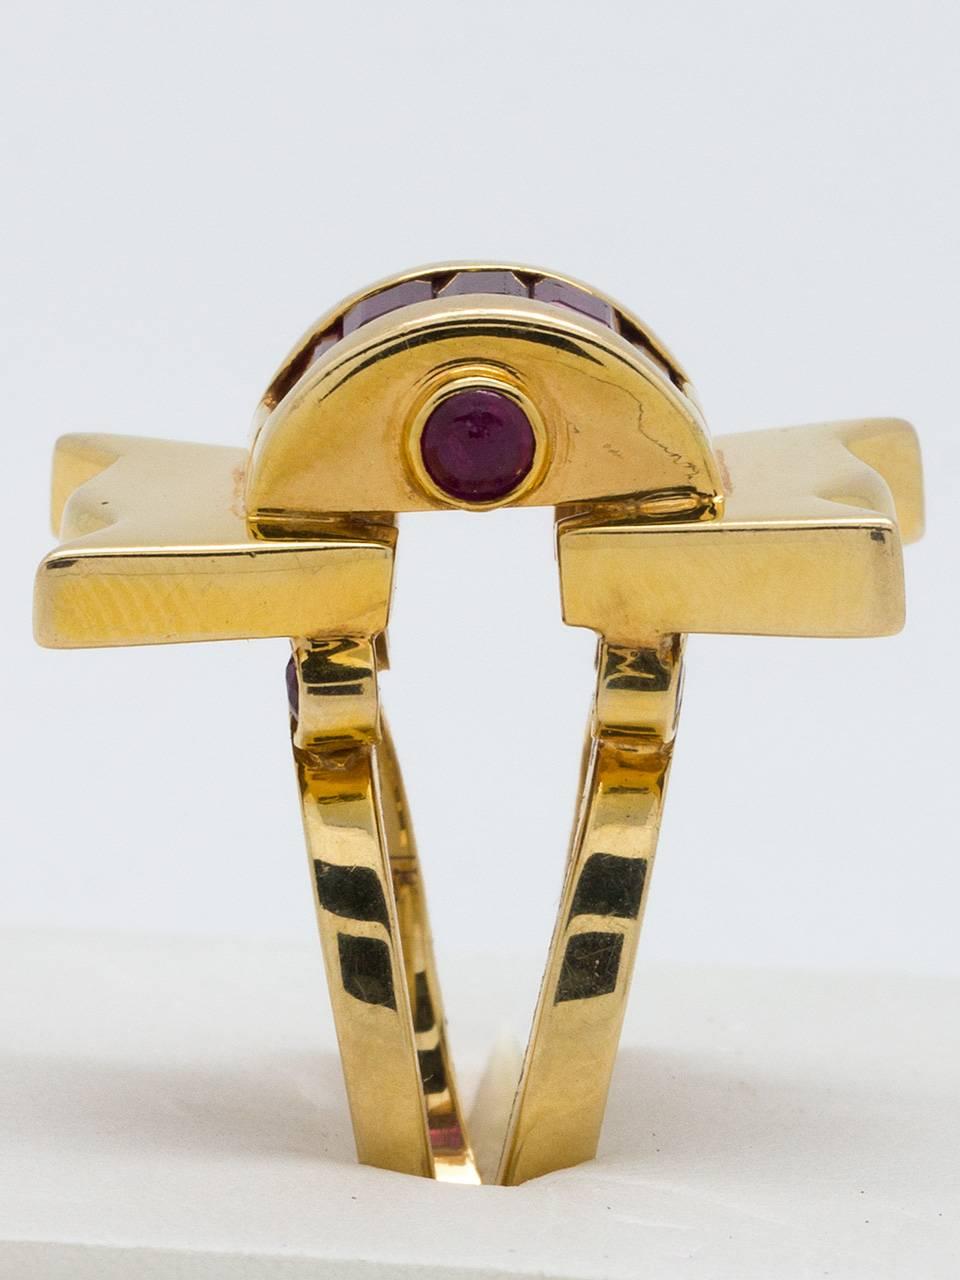 Women's Retro Gold and Ruby Ring circa 1940s